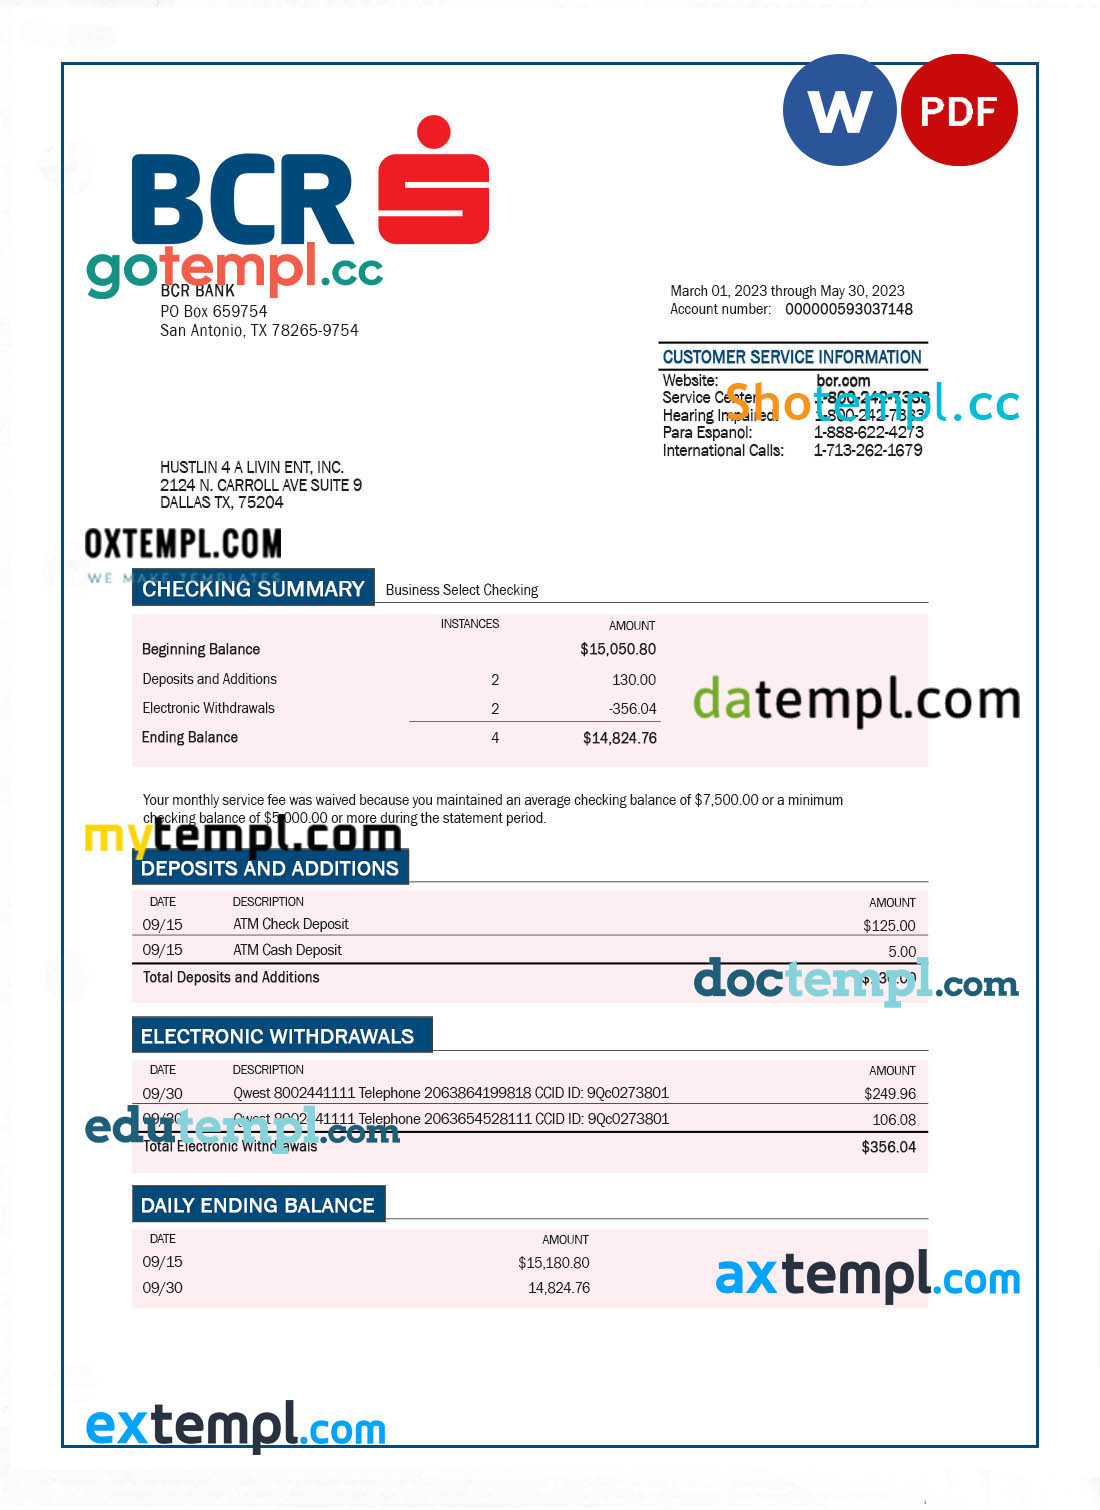 BCR Bank company checking account statement Word and PDF template